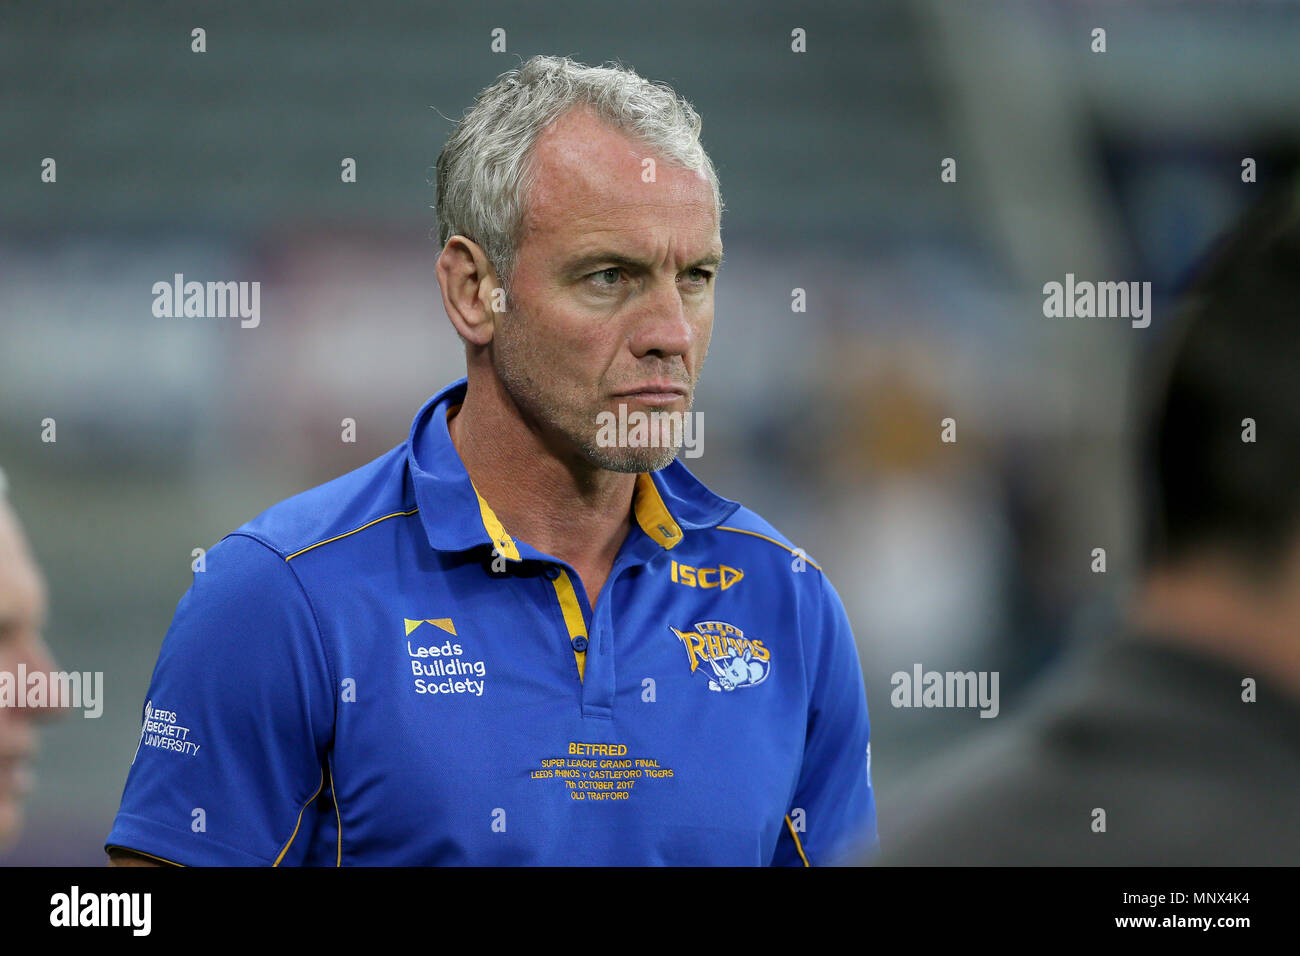 Leeds Rhino's head Coach Brian McDermott after the Betfred Super League, Magic Weekend match at St James' Park, Newcastle. PRESS ASSOCIATION Photo. Picture date: Saturday May 19, 2018. See PA story RUGBYL Castleford. Photo credit should read: Richard Sellers/PA Wire. Stock Photo